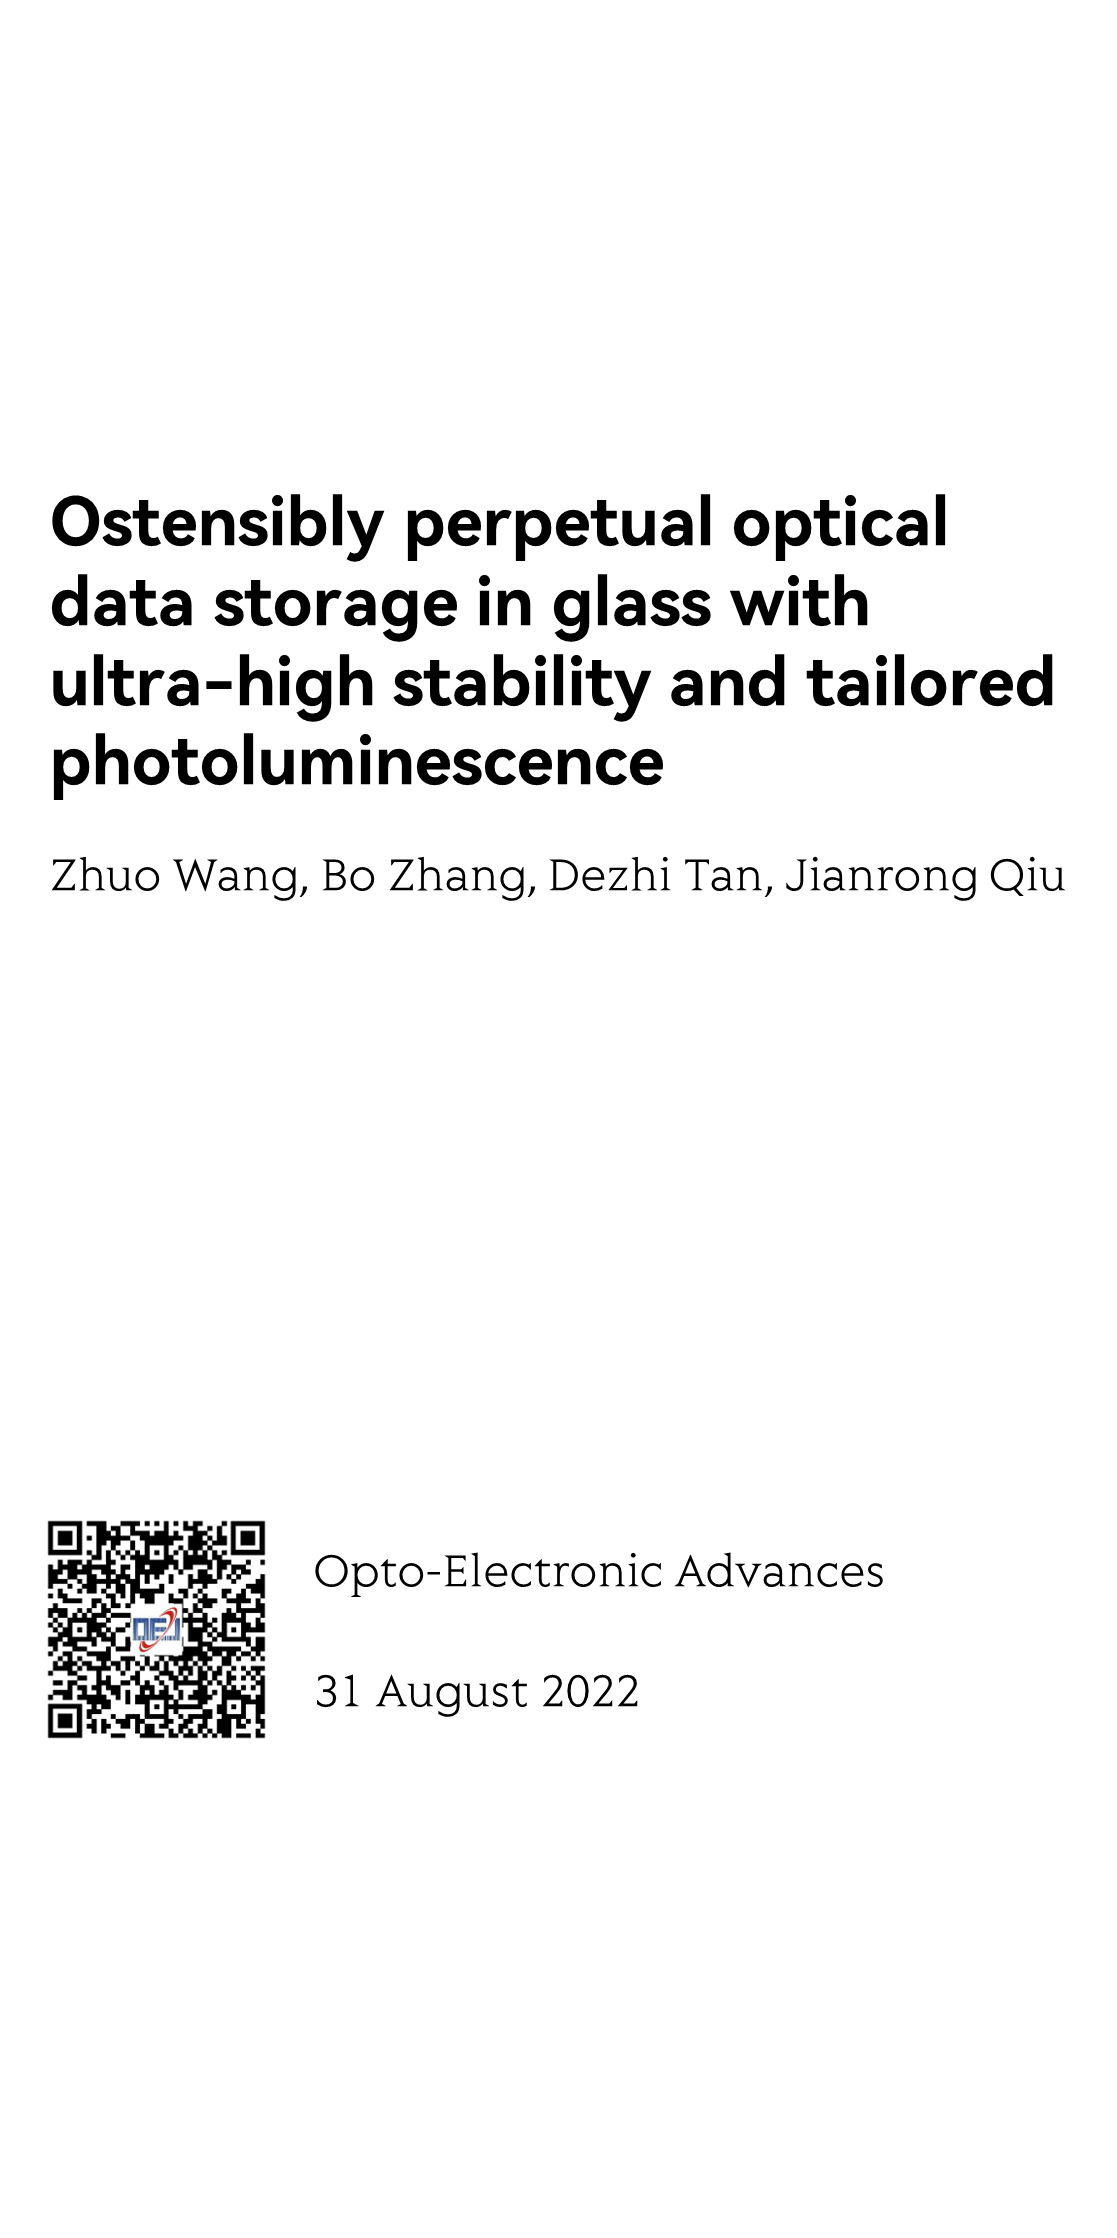 Ostensibly perpetual optical data storage in glass with ultra-high stability and tailored photoluminescence_1